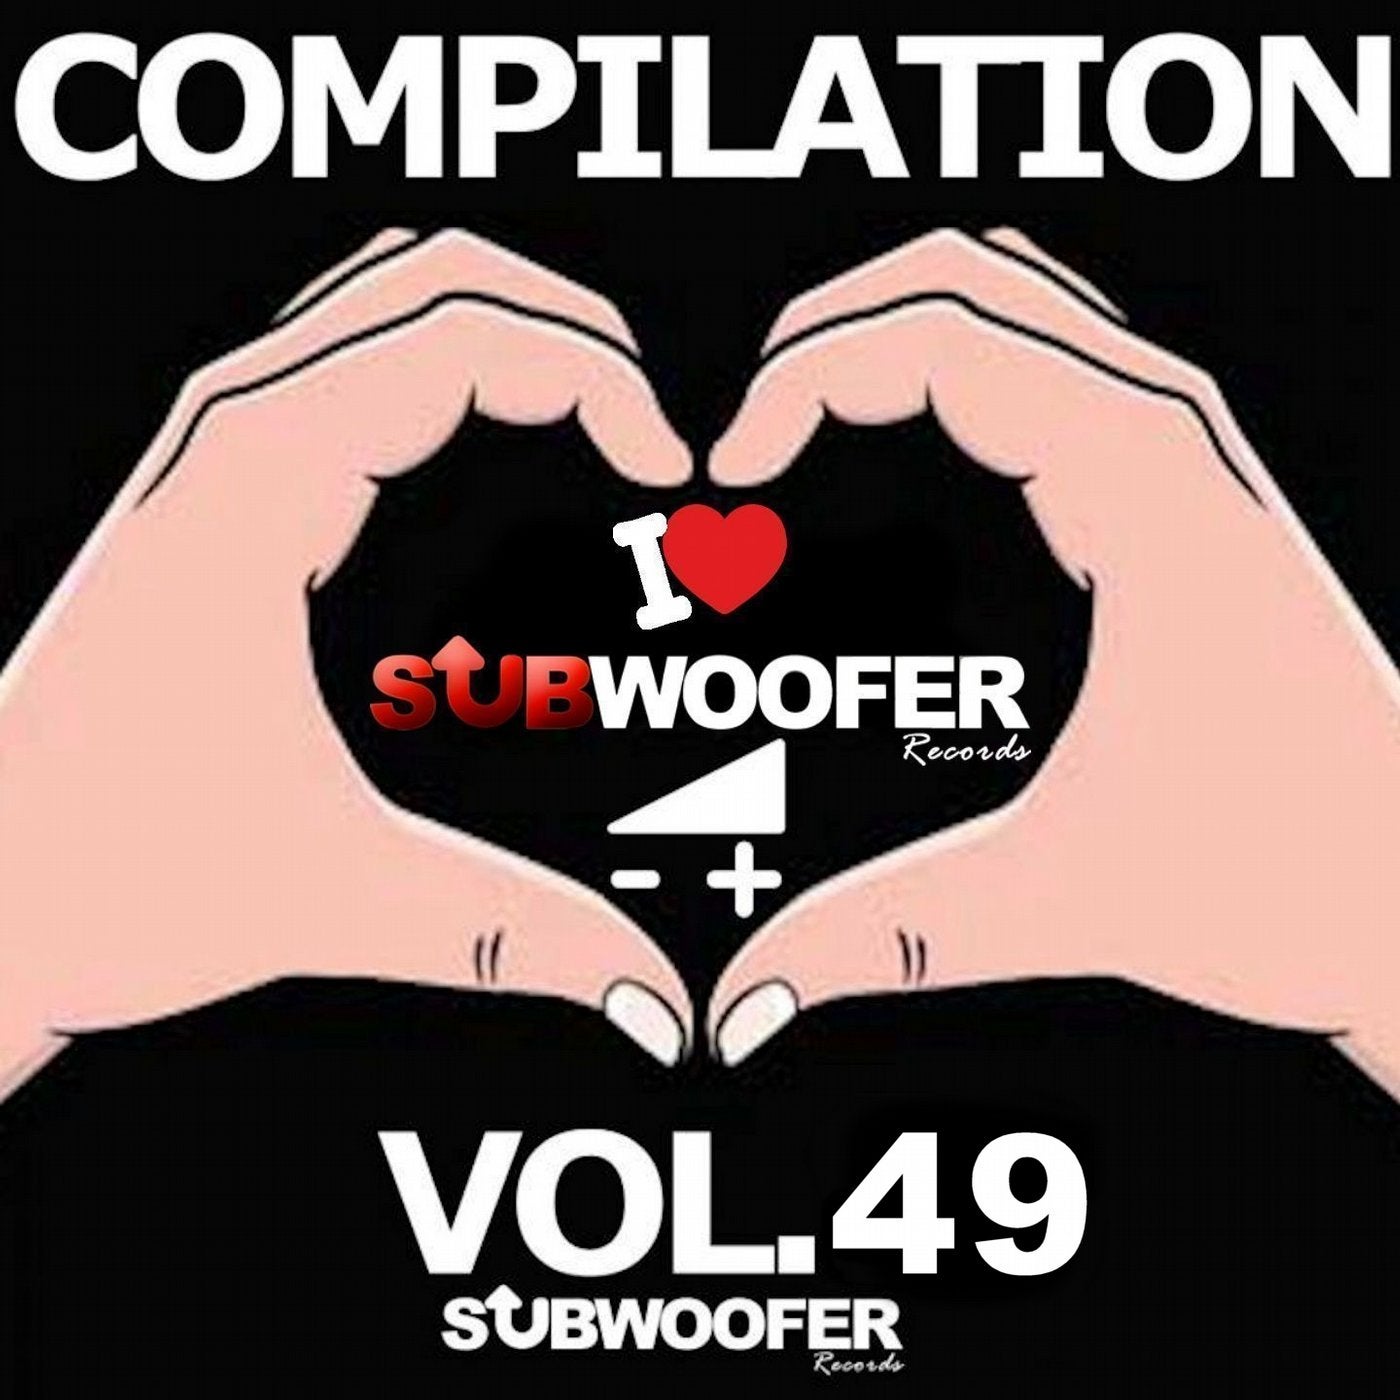 I Love Subwoofer Records Techno Compilation, Vol. 49 (Greatest Hits)